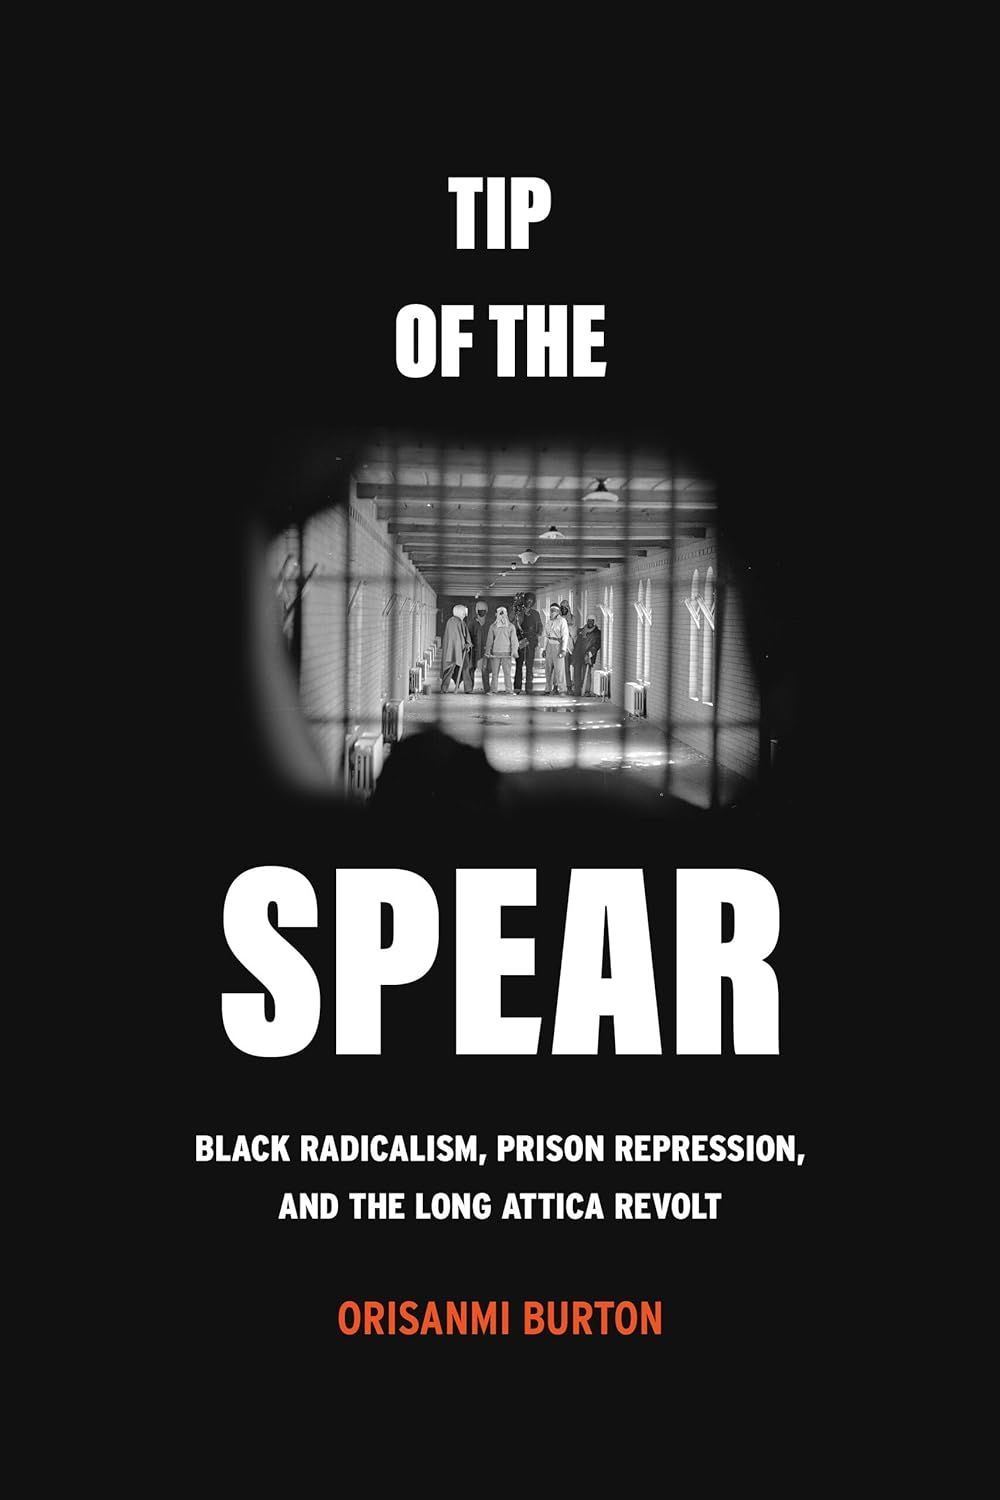 A Story That We Only Think We Know: On Orisanmi Burton’s “Tip of the Spear”